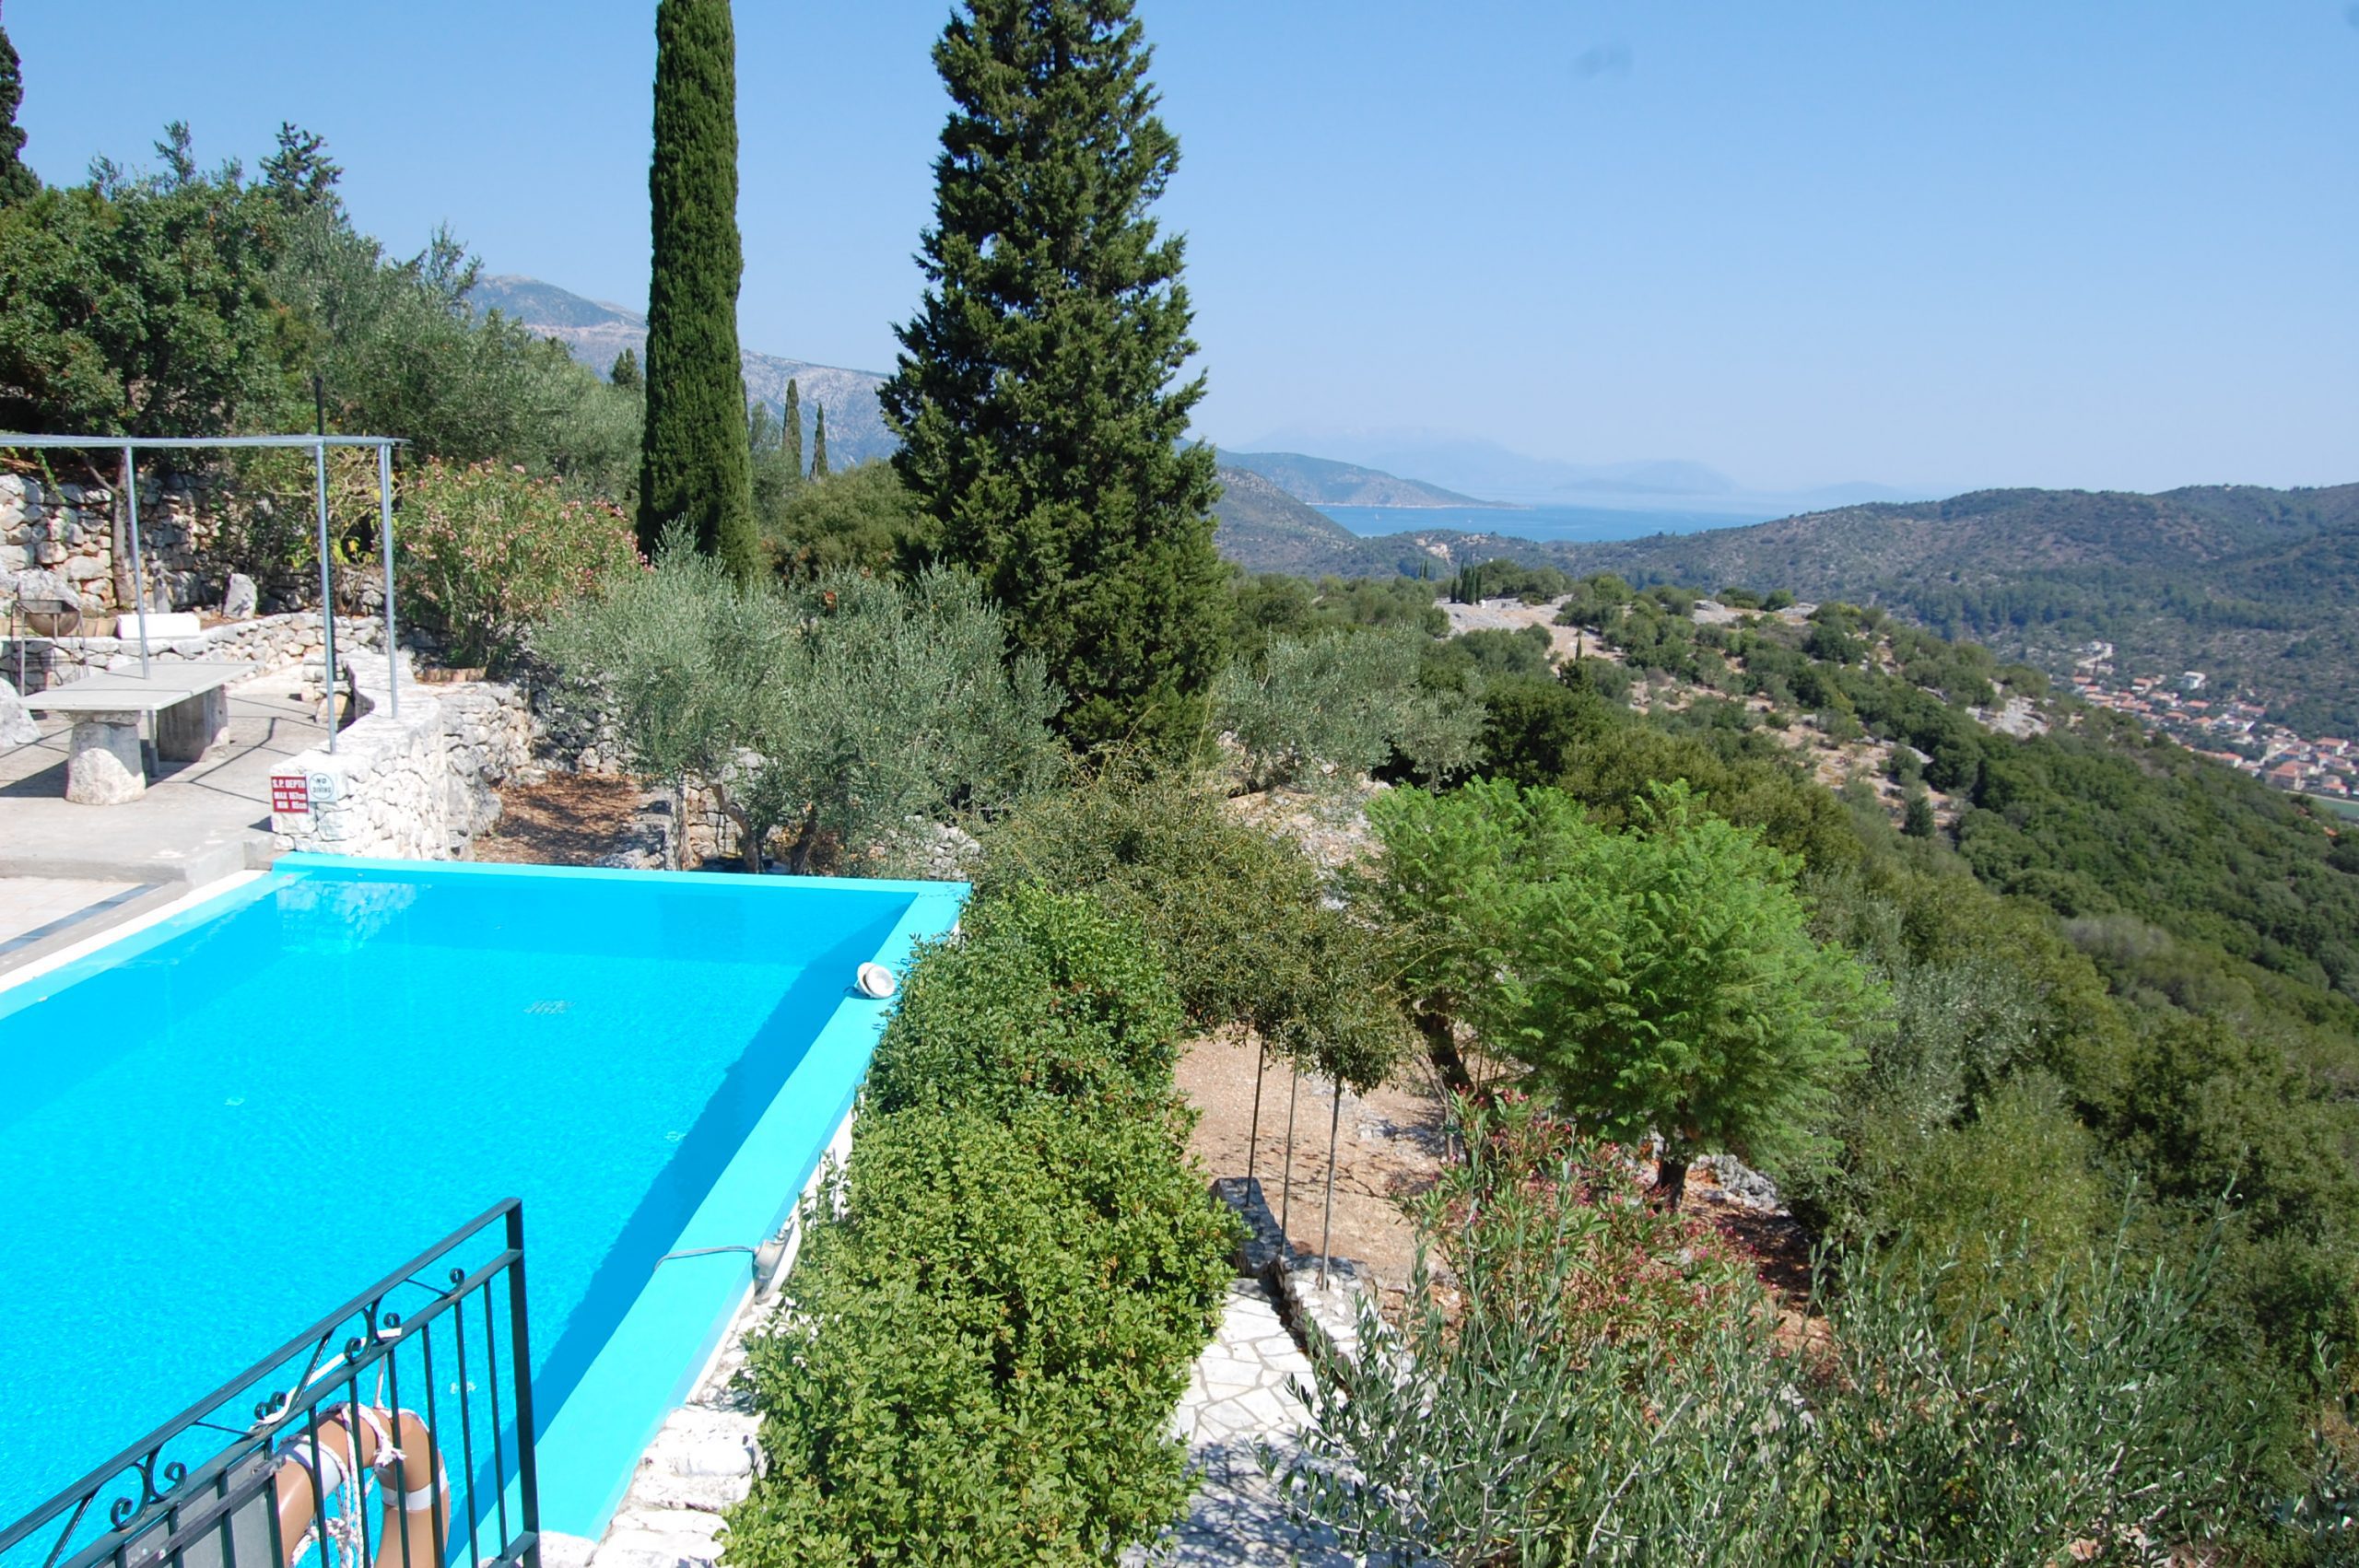 Swimming pool and stone terrace with view of property for sale in Ithaca Greece Perachori